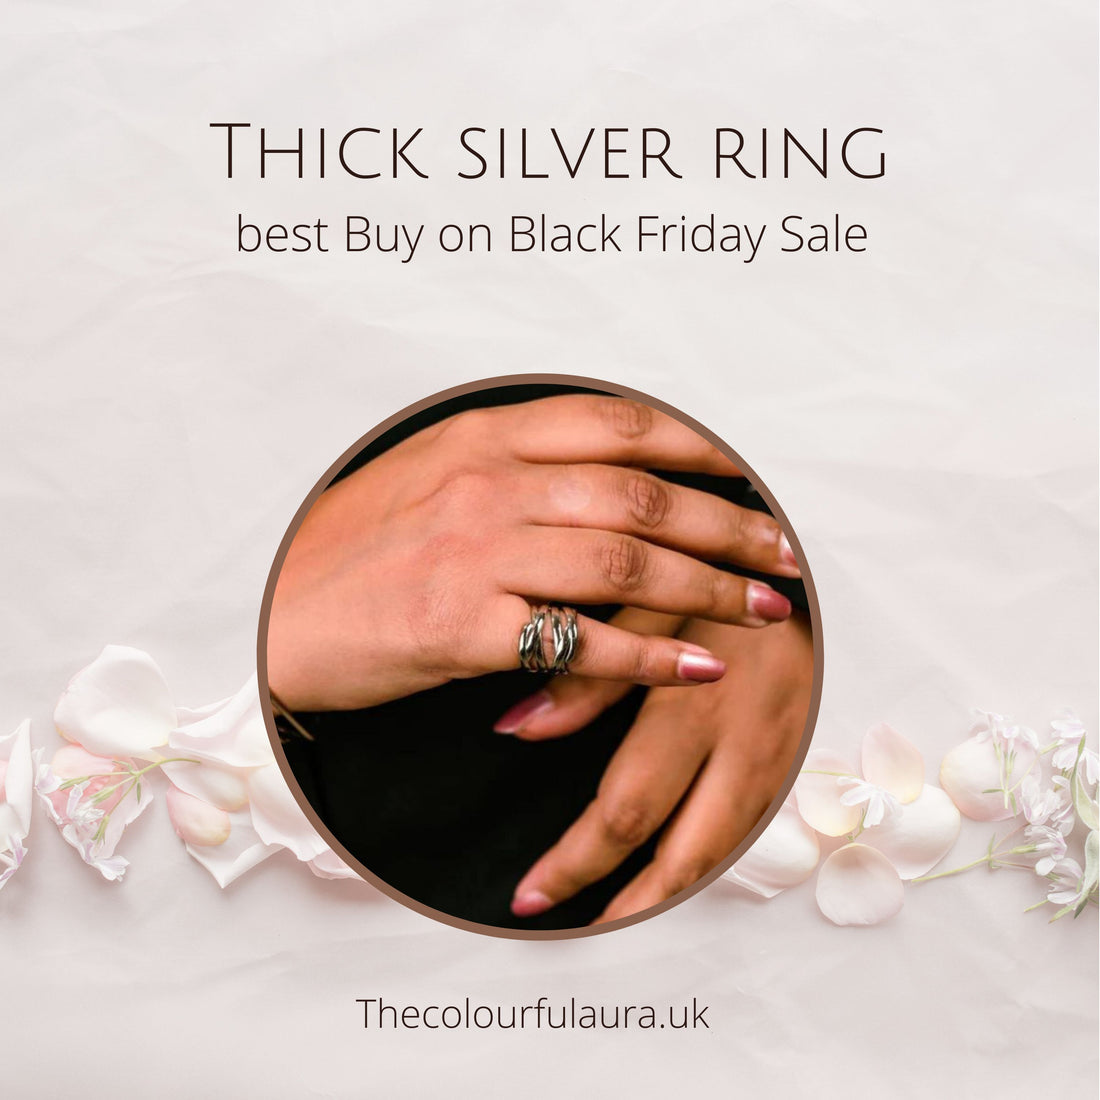 Thick Silver Thumb Ring - Will Let you Be in trend this Black Friday.